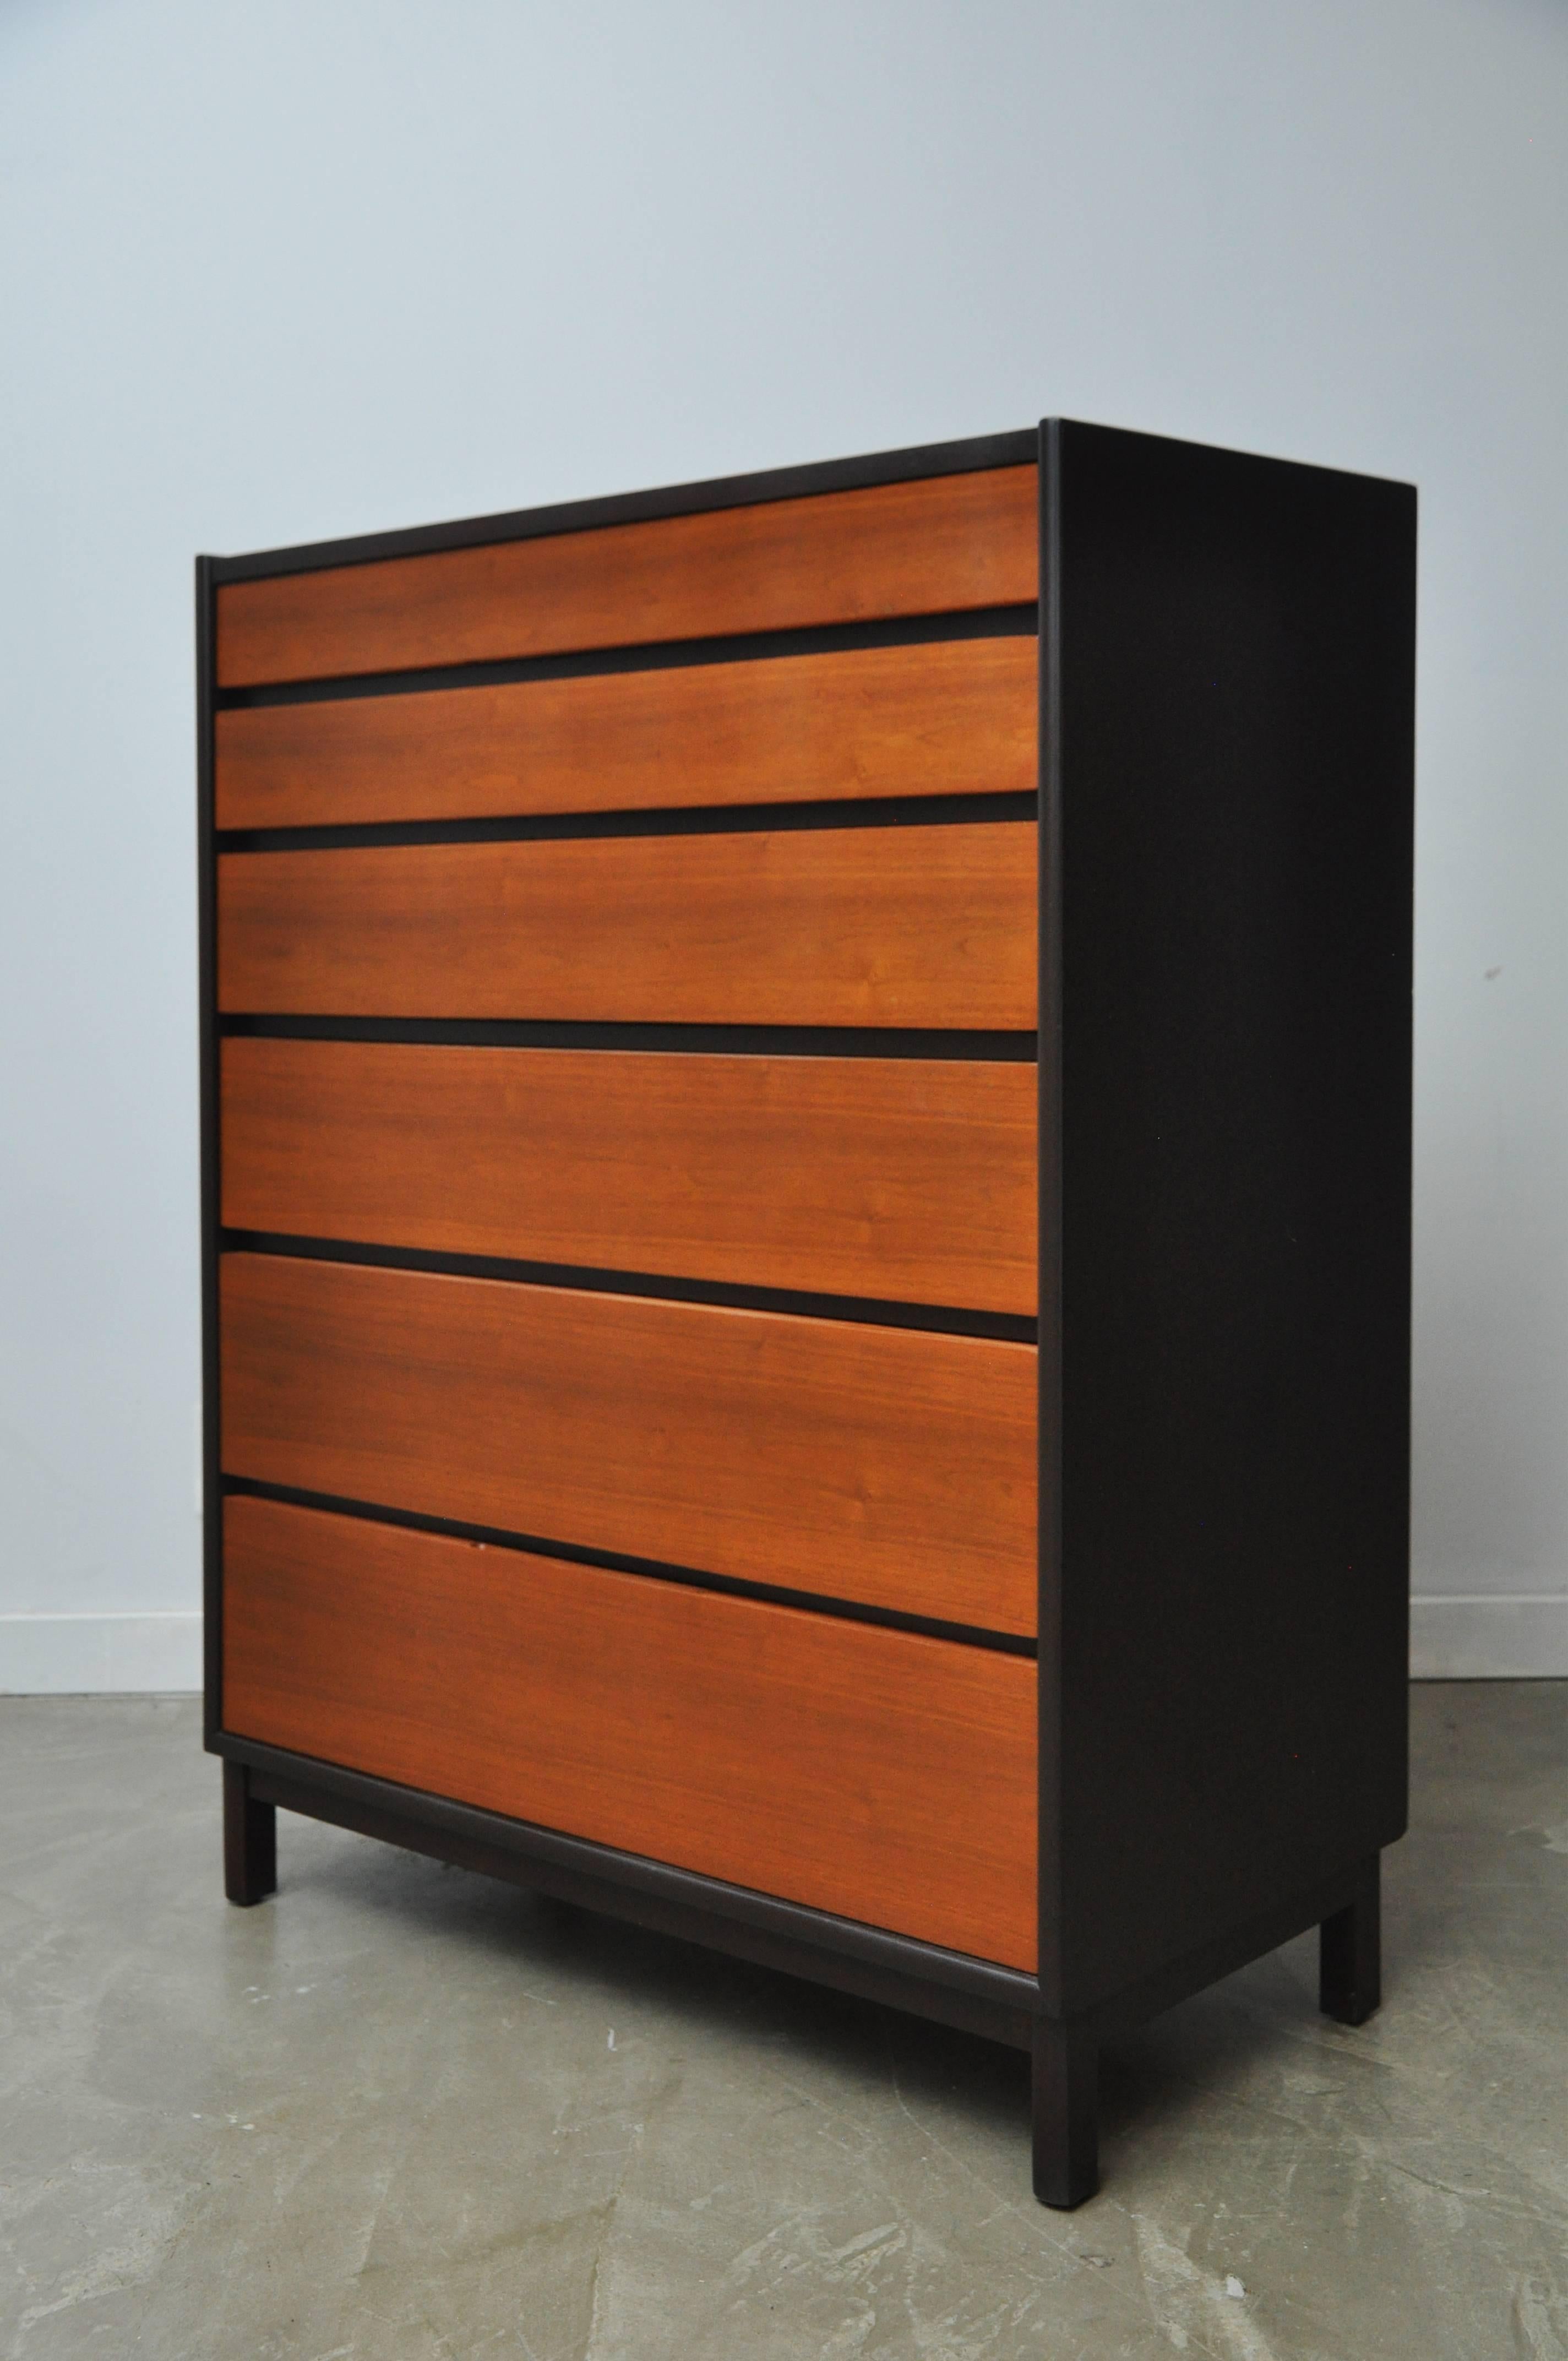 Beautiful six-drawer tall dresser by Edward Wormley for Dunbar, circa 1960. Dark espresso mahogany cases with natural walnut drawer fronts and top, giving a striking contrast. Fully restored and in excellent condition.
 